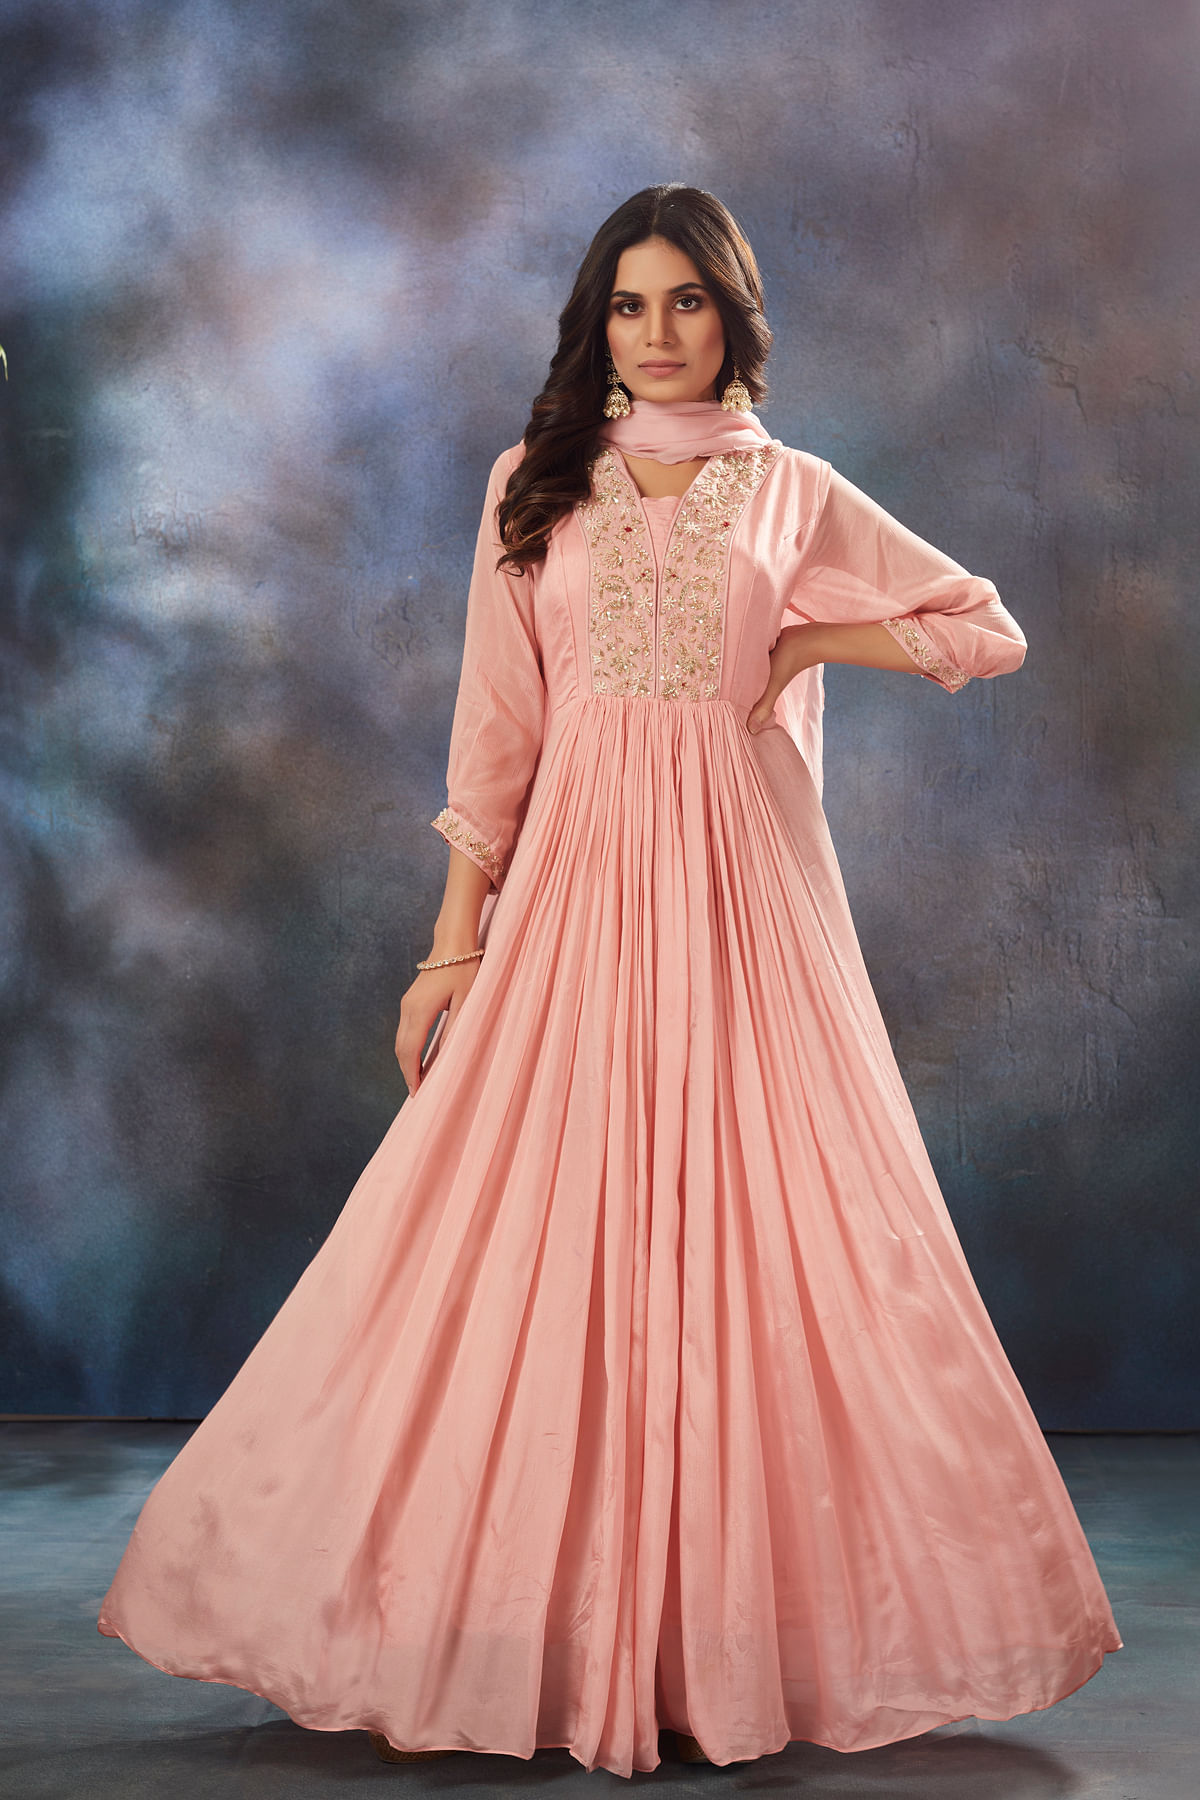 Swagat Violet Salwar Kameez Anarkali Gown DN 5407 at Rs.1600/PER PIECE in  surat offer by Leranath Fashion House